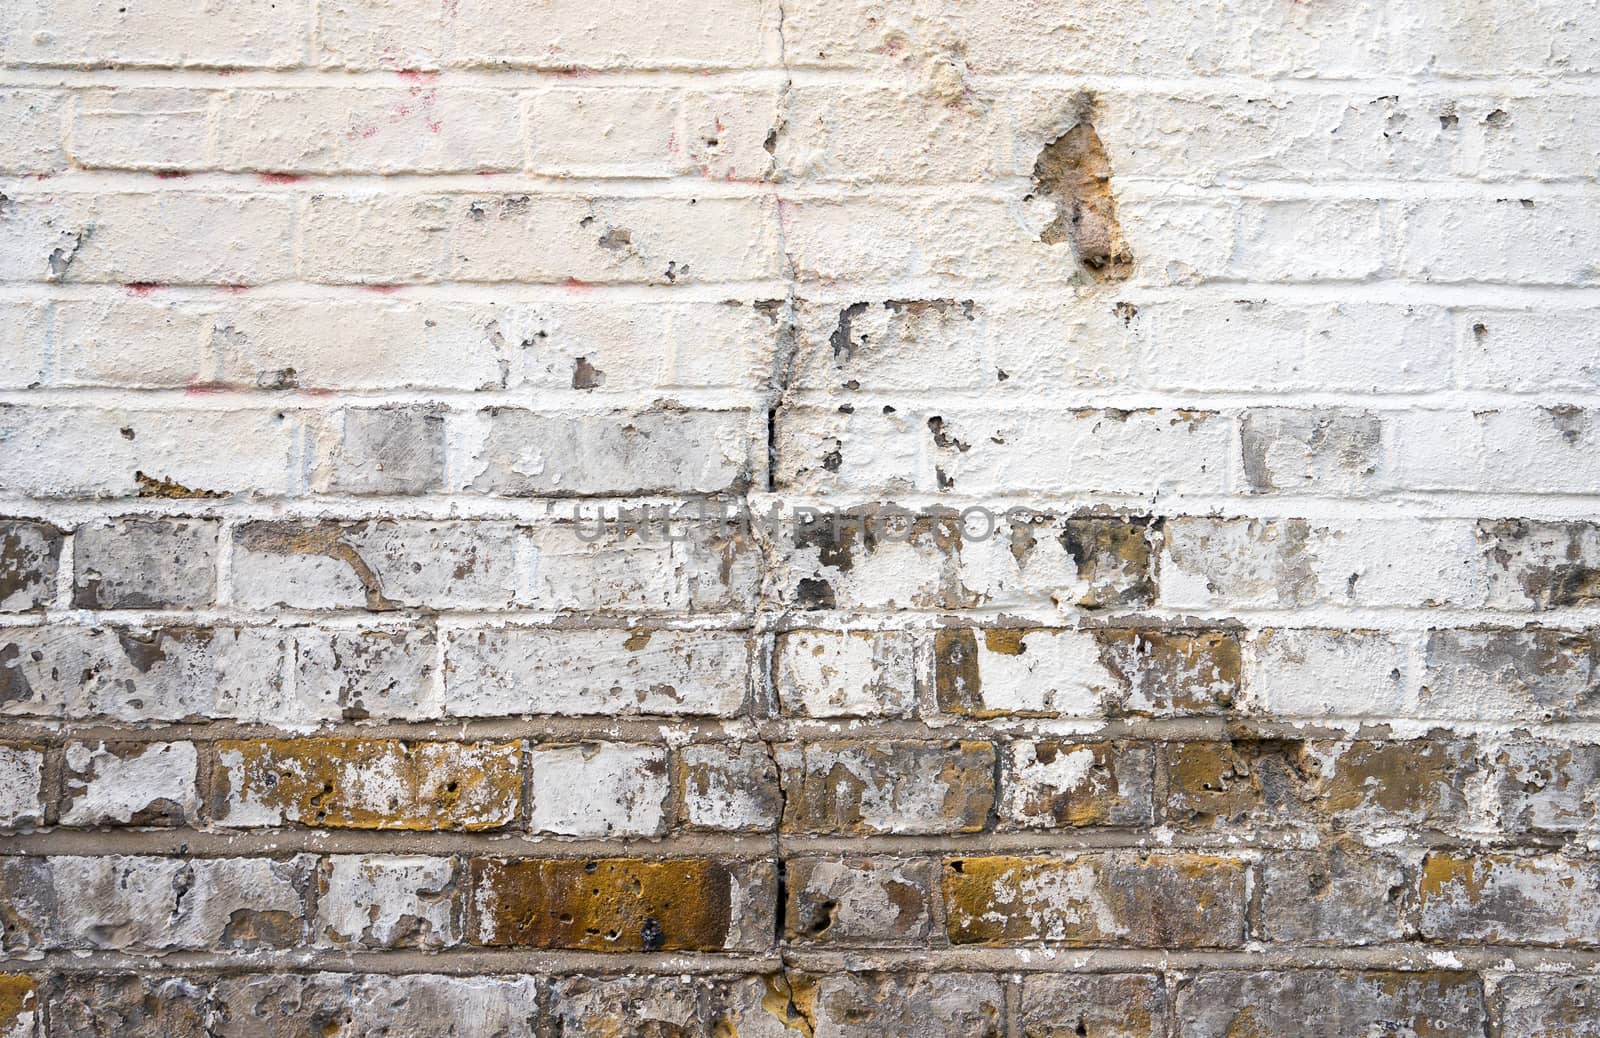 dirty brick wall, grungy red, white & grey texture background by Alicephoto